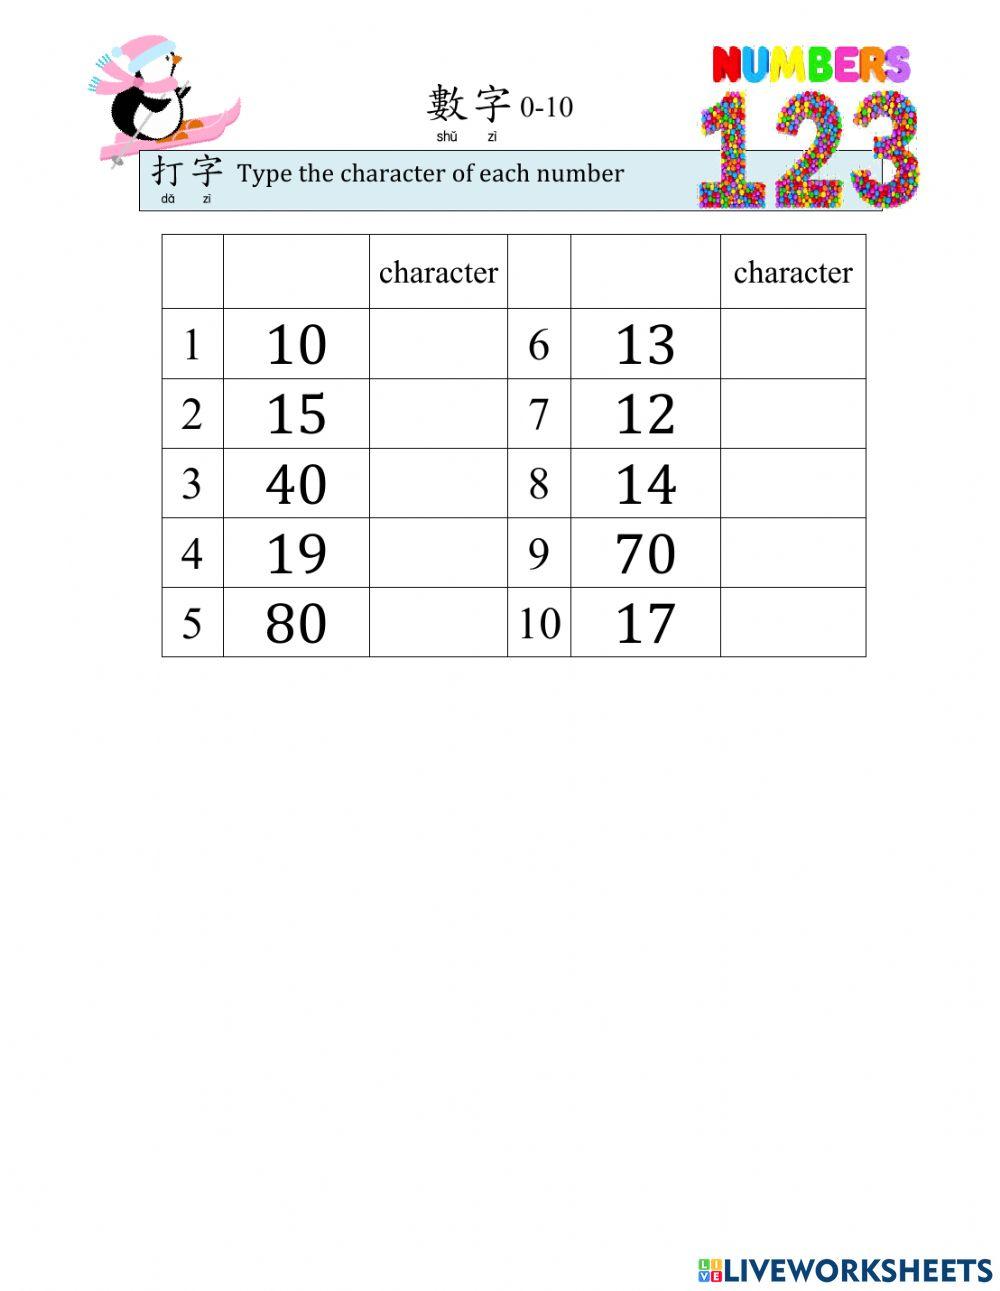 Numbers 10s-character typing 2